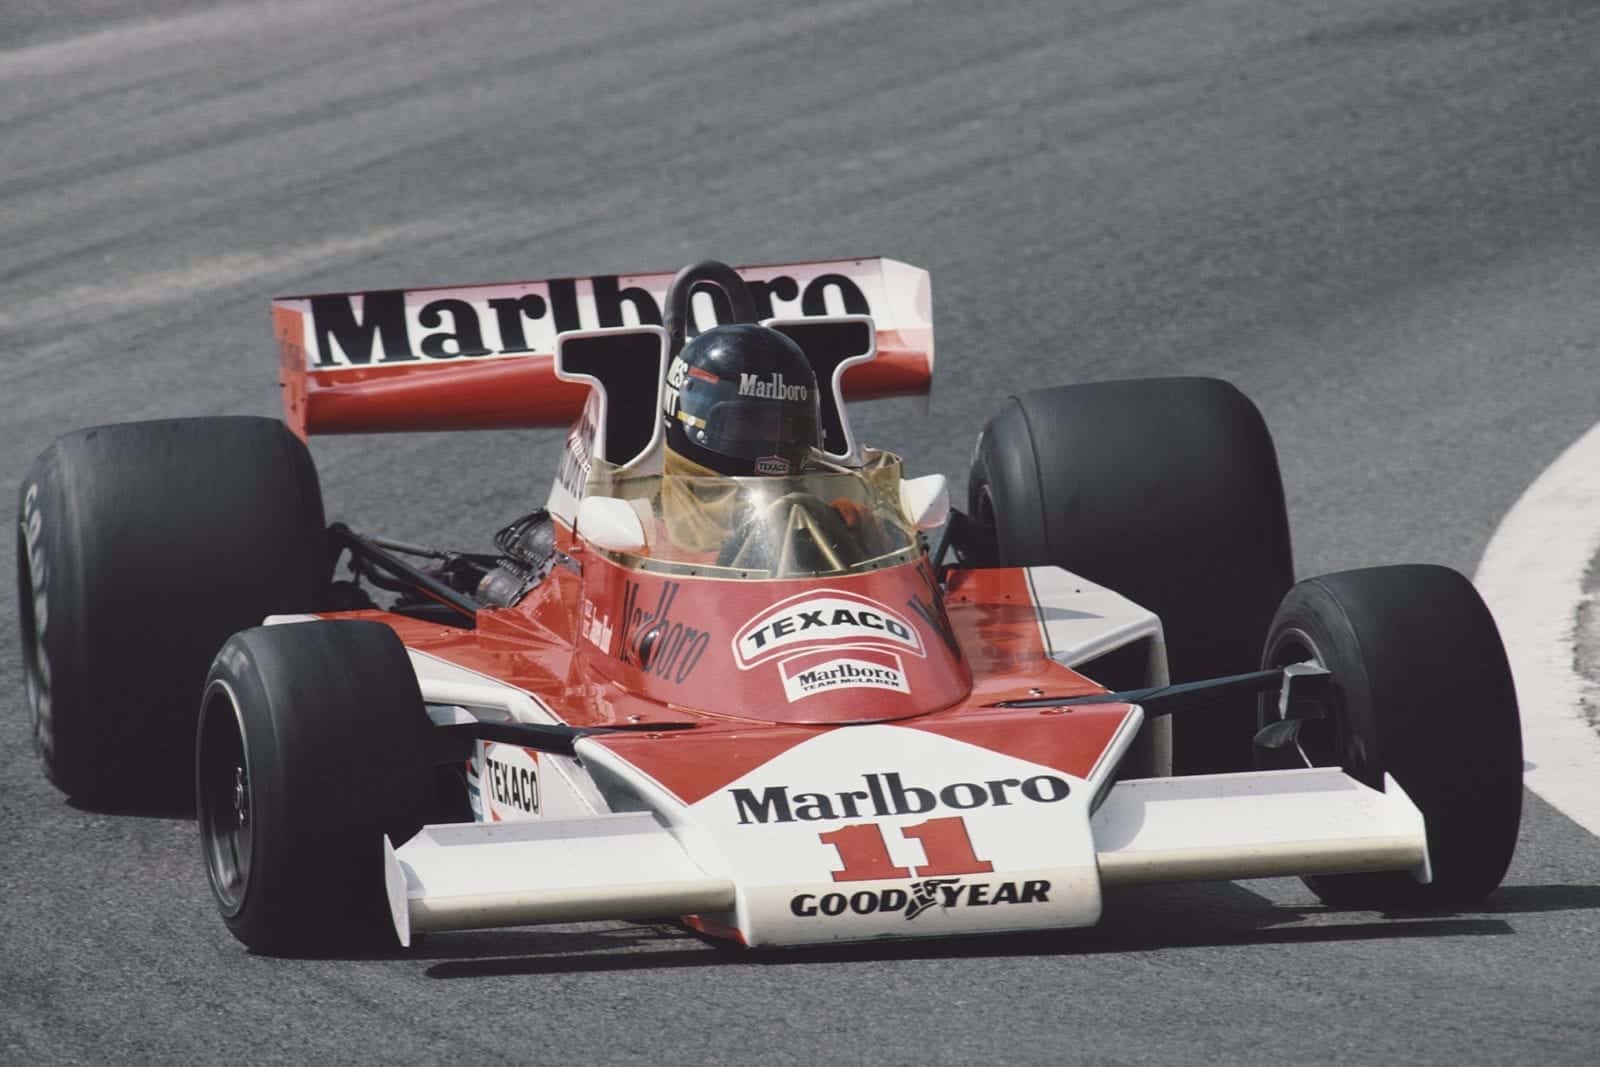 James Hunt on his way to victory at the 1976 Spanish Grand Prix.